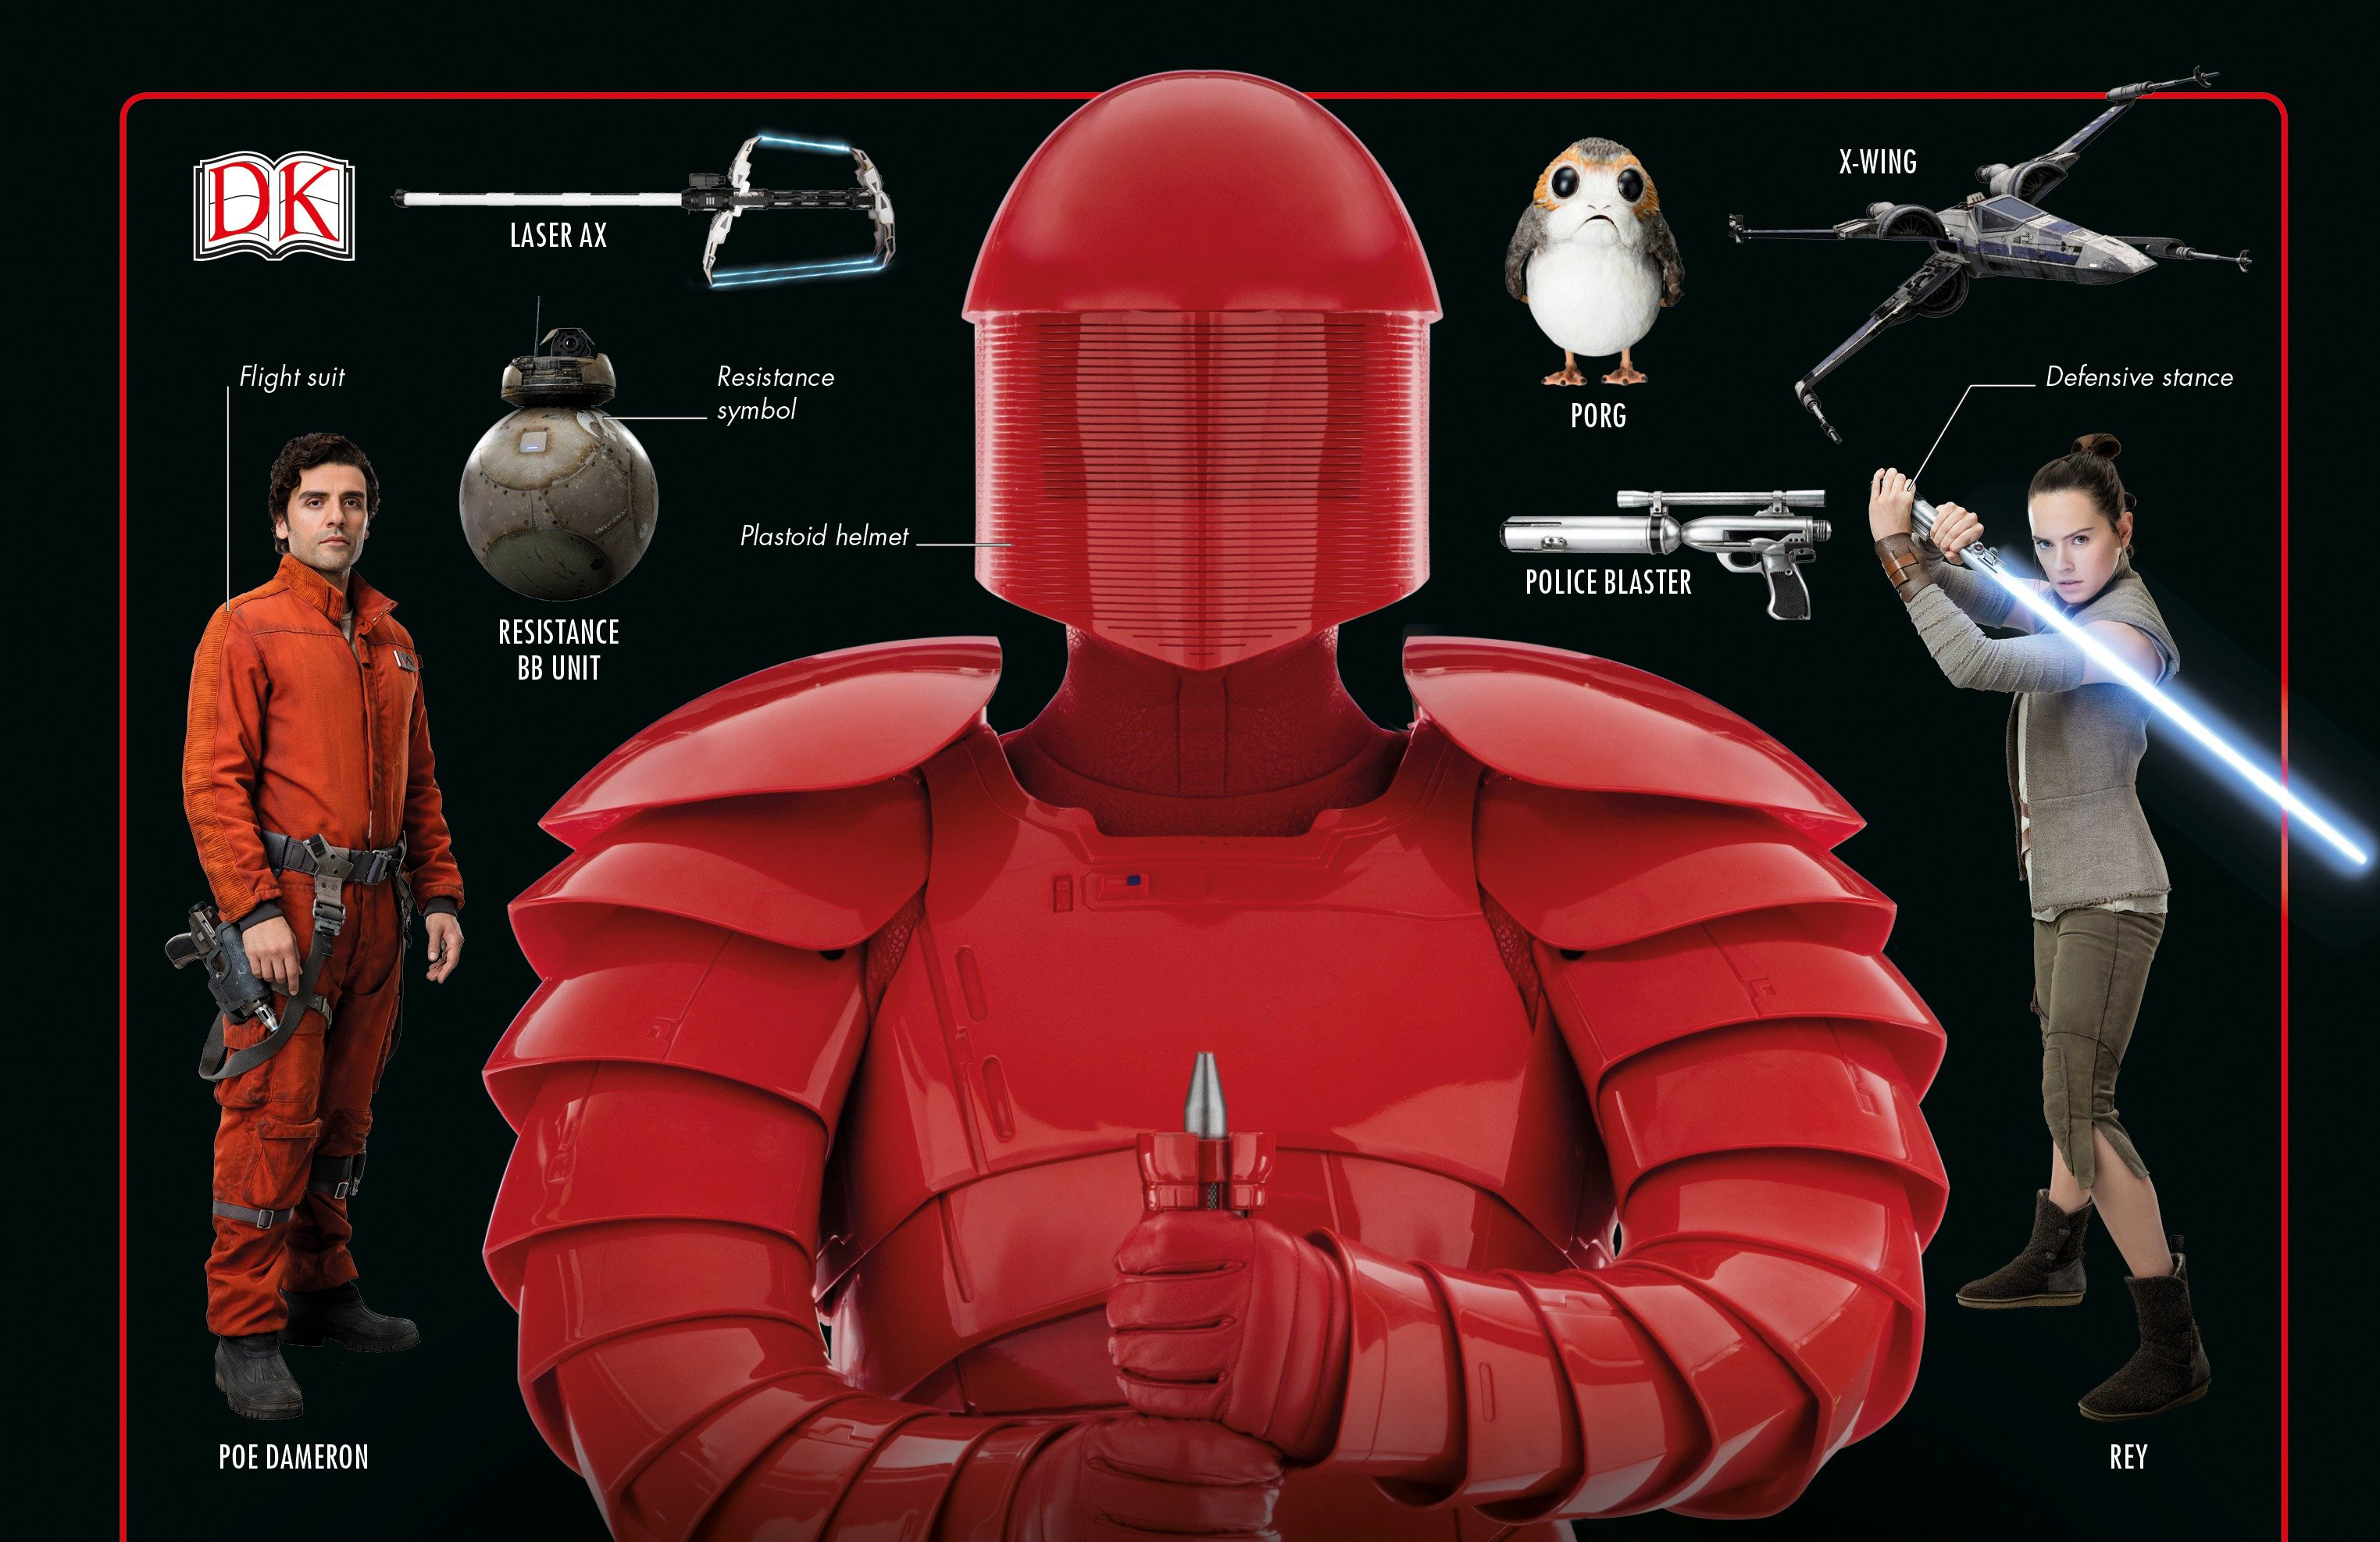 Star Wars: The Last Jedi - The Visual Dictionary by Pablo Hidalgo